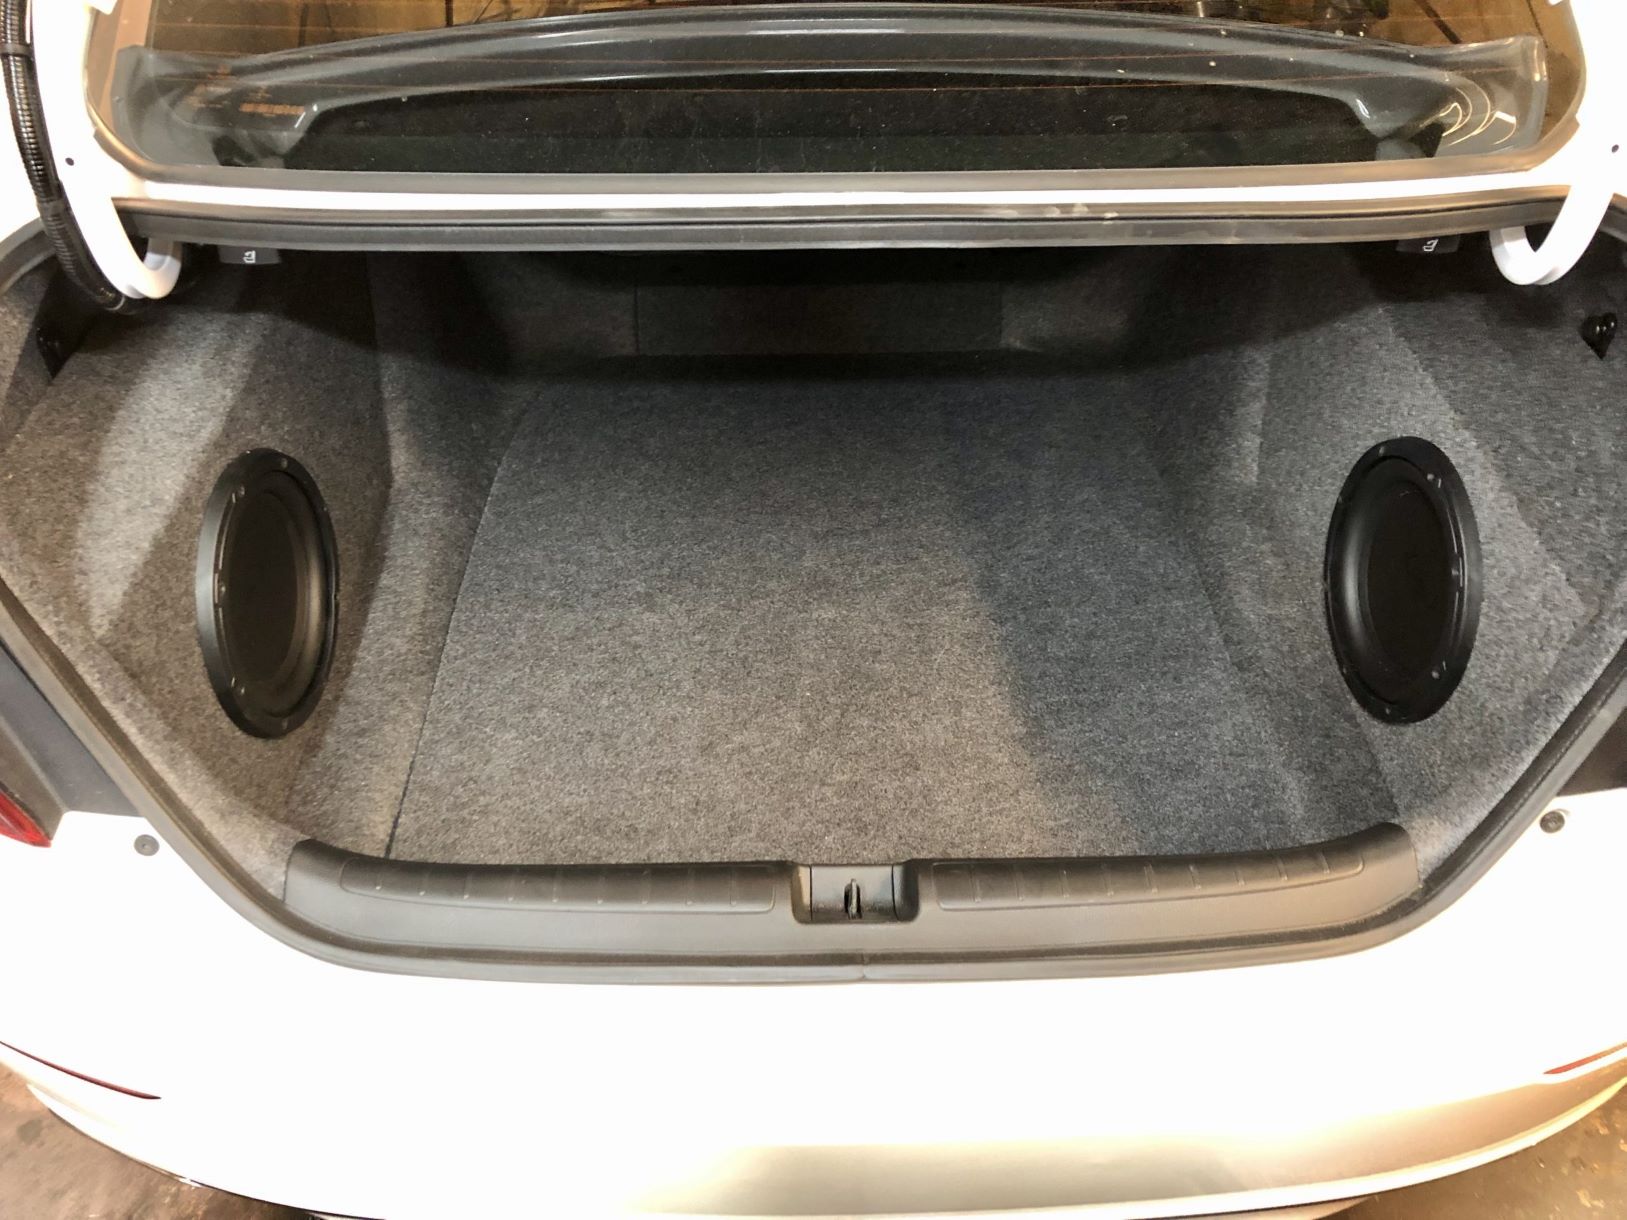 How To Install Subwoofer Honda Accord